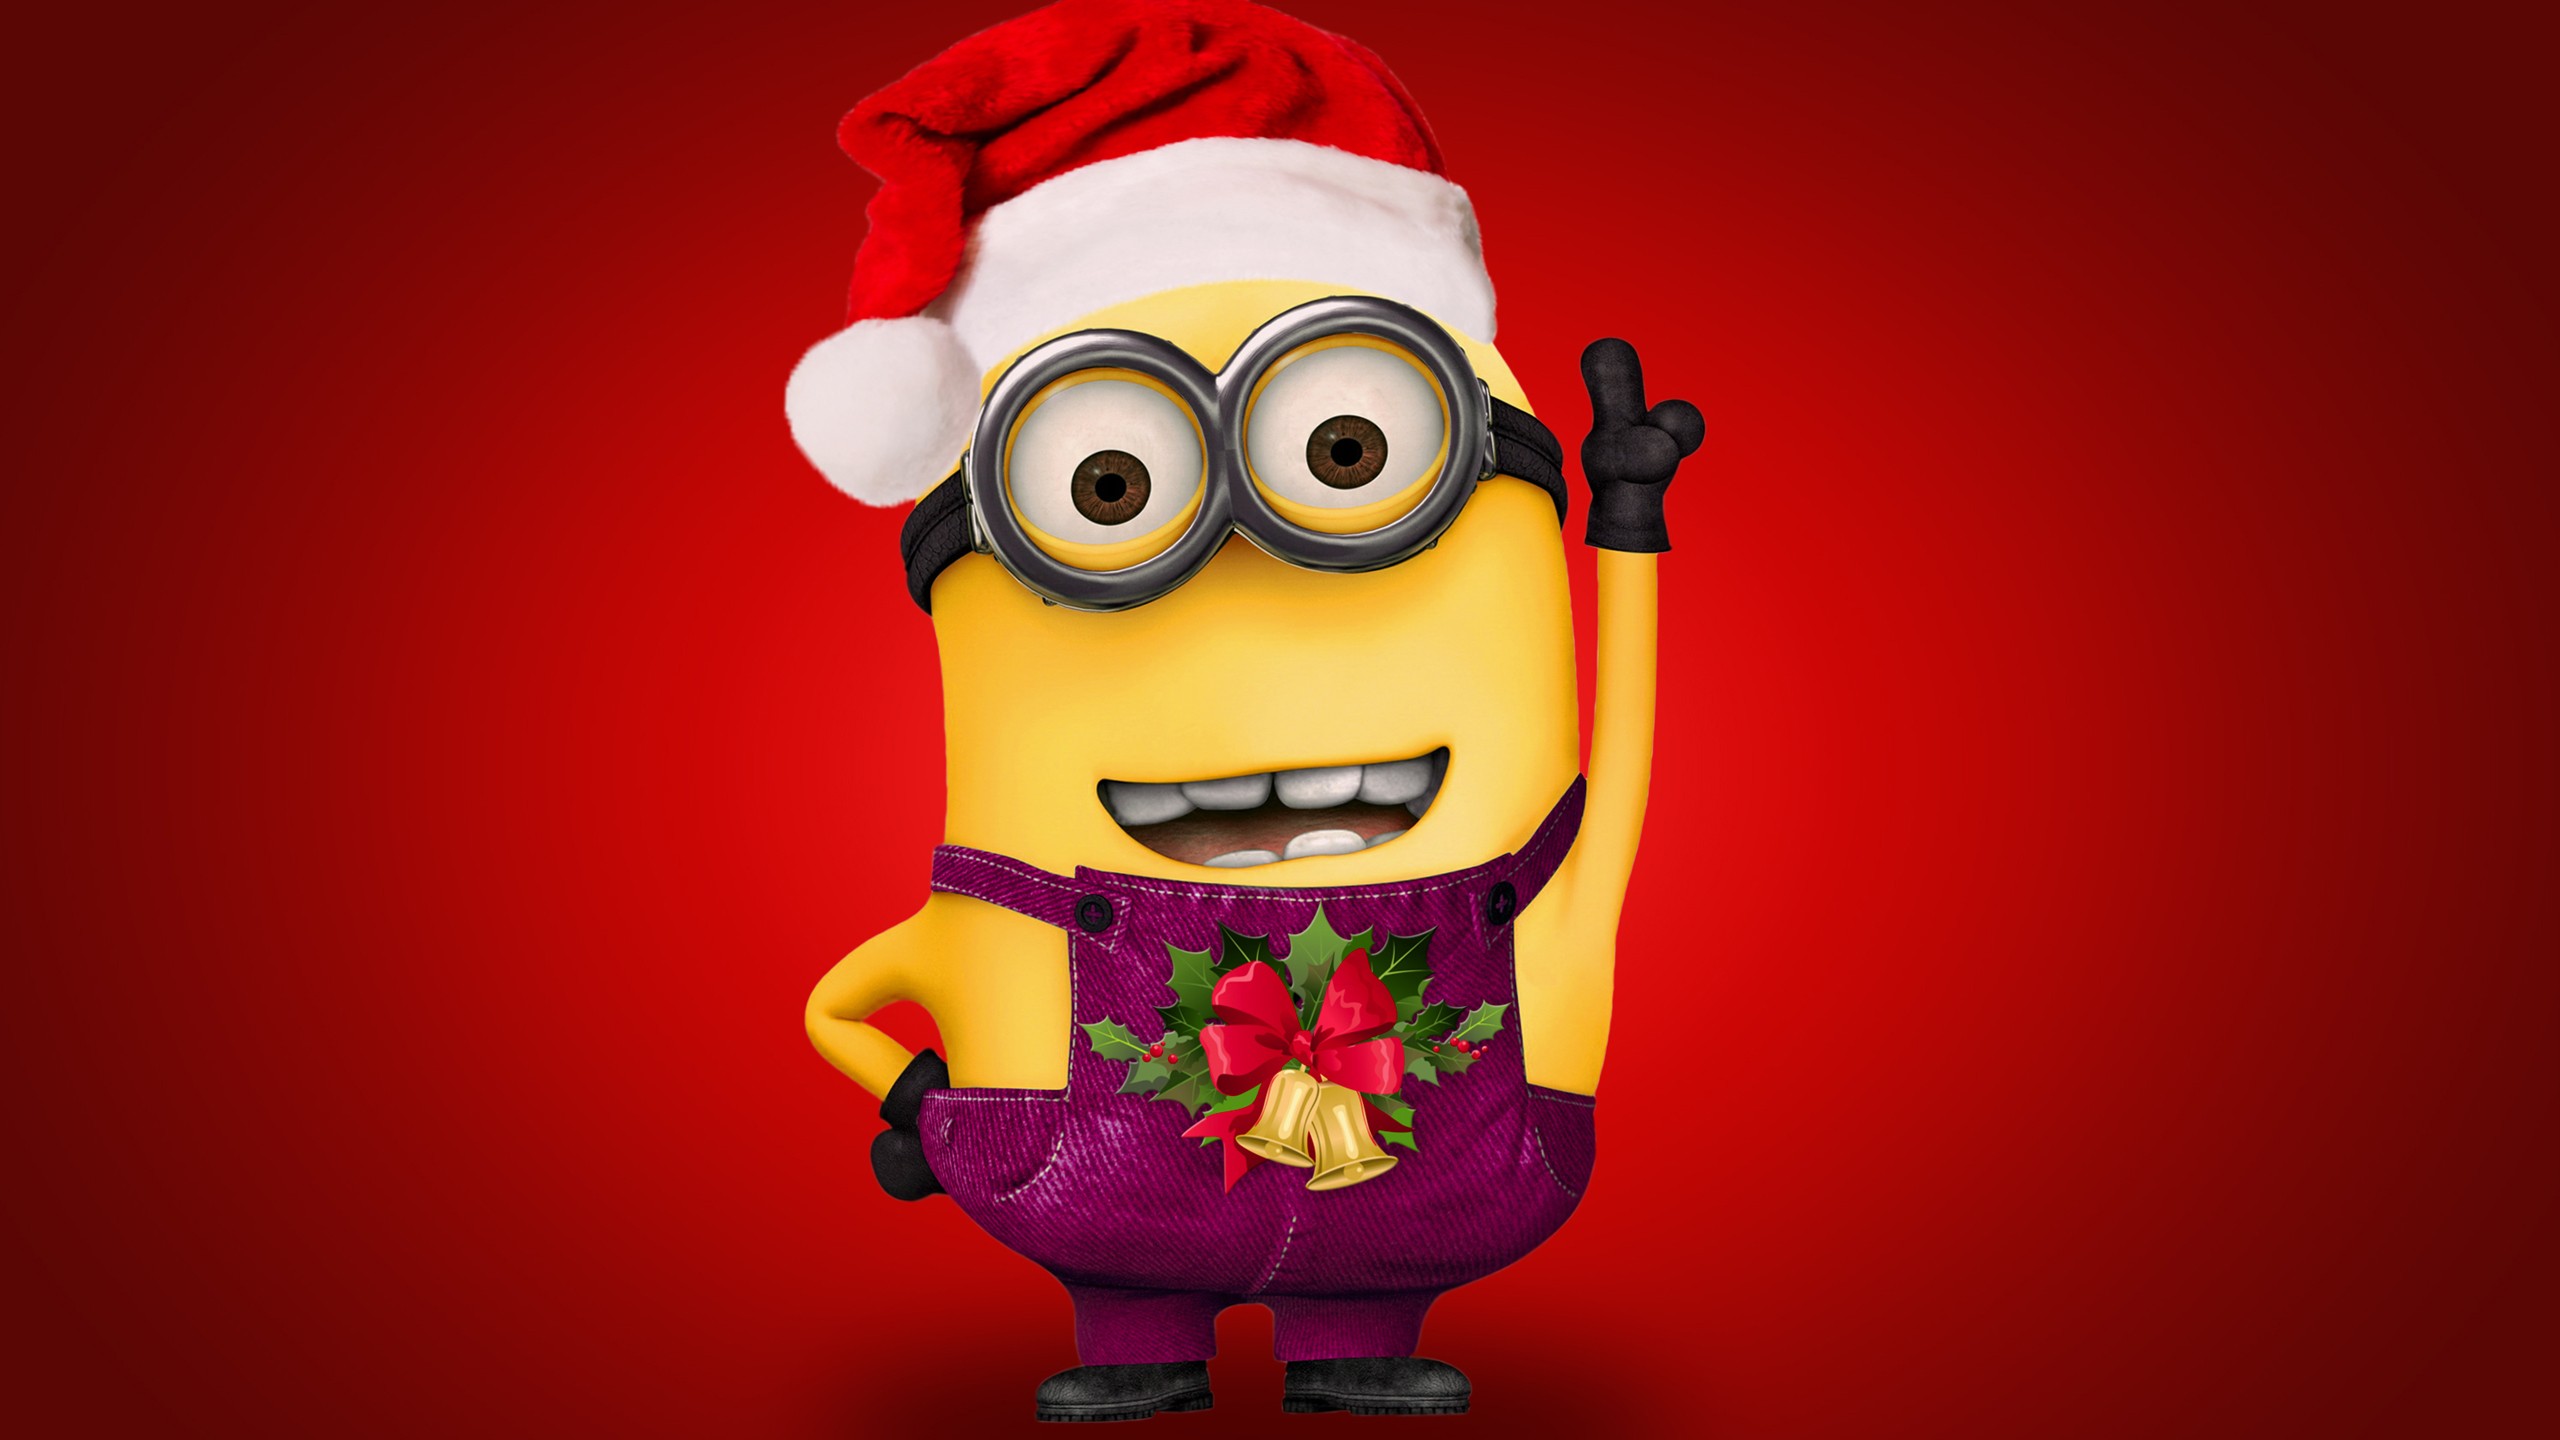 General 2560x1440 minions Christmas red background Santa hats movie characters digital art simple background